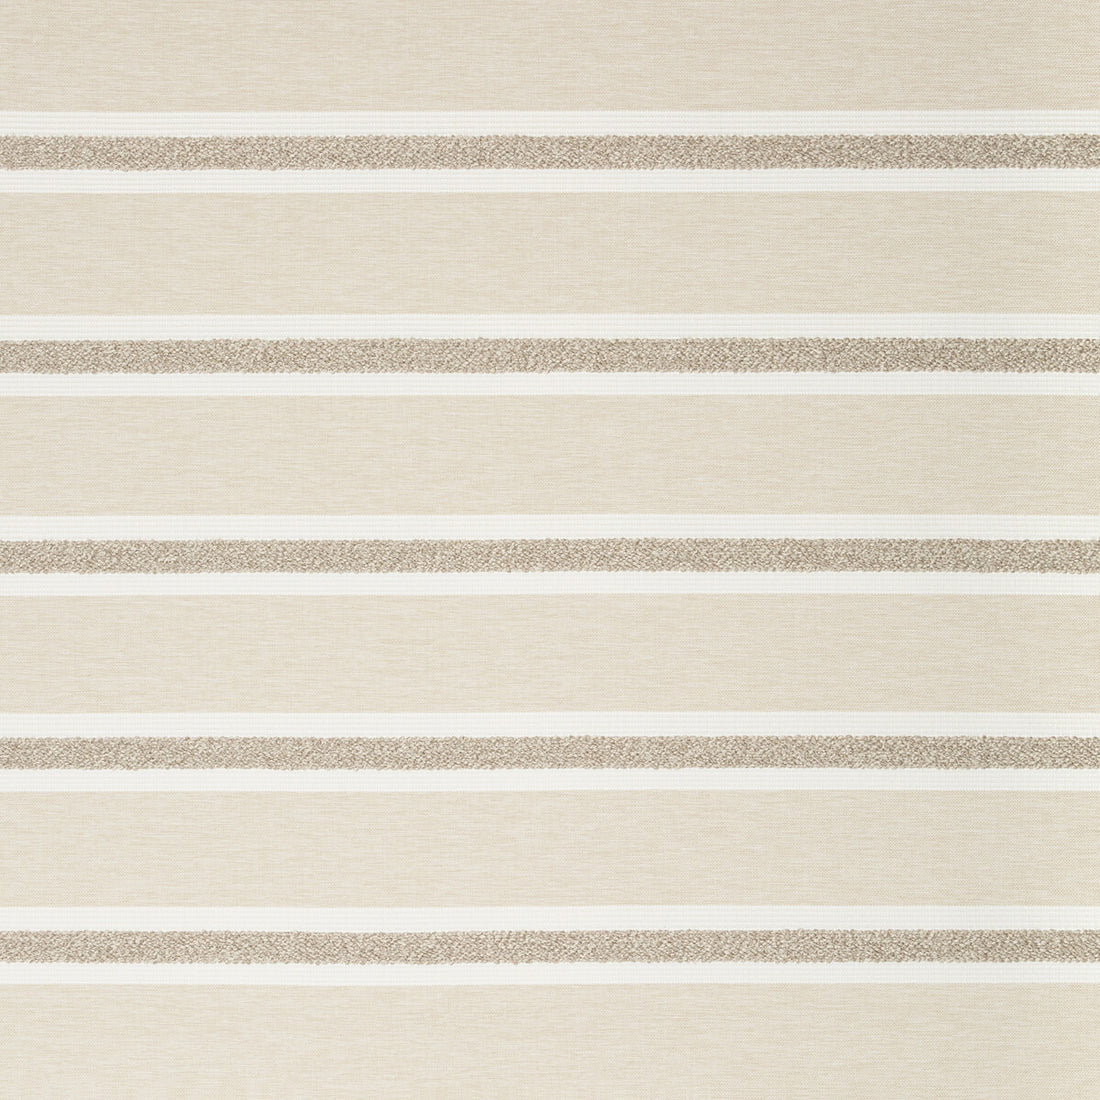 Know The Ropes fabric in natural color - pattern 35539.16.0 - by Kravet Couture in the Vista collection